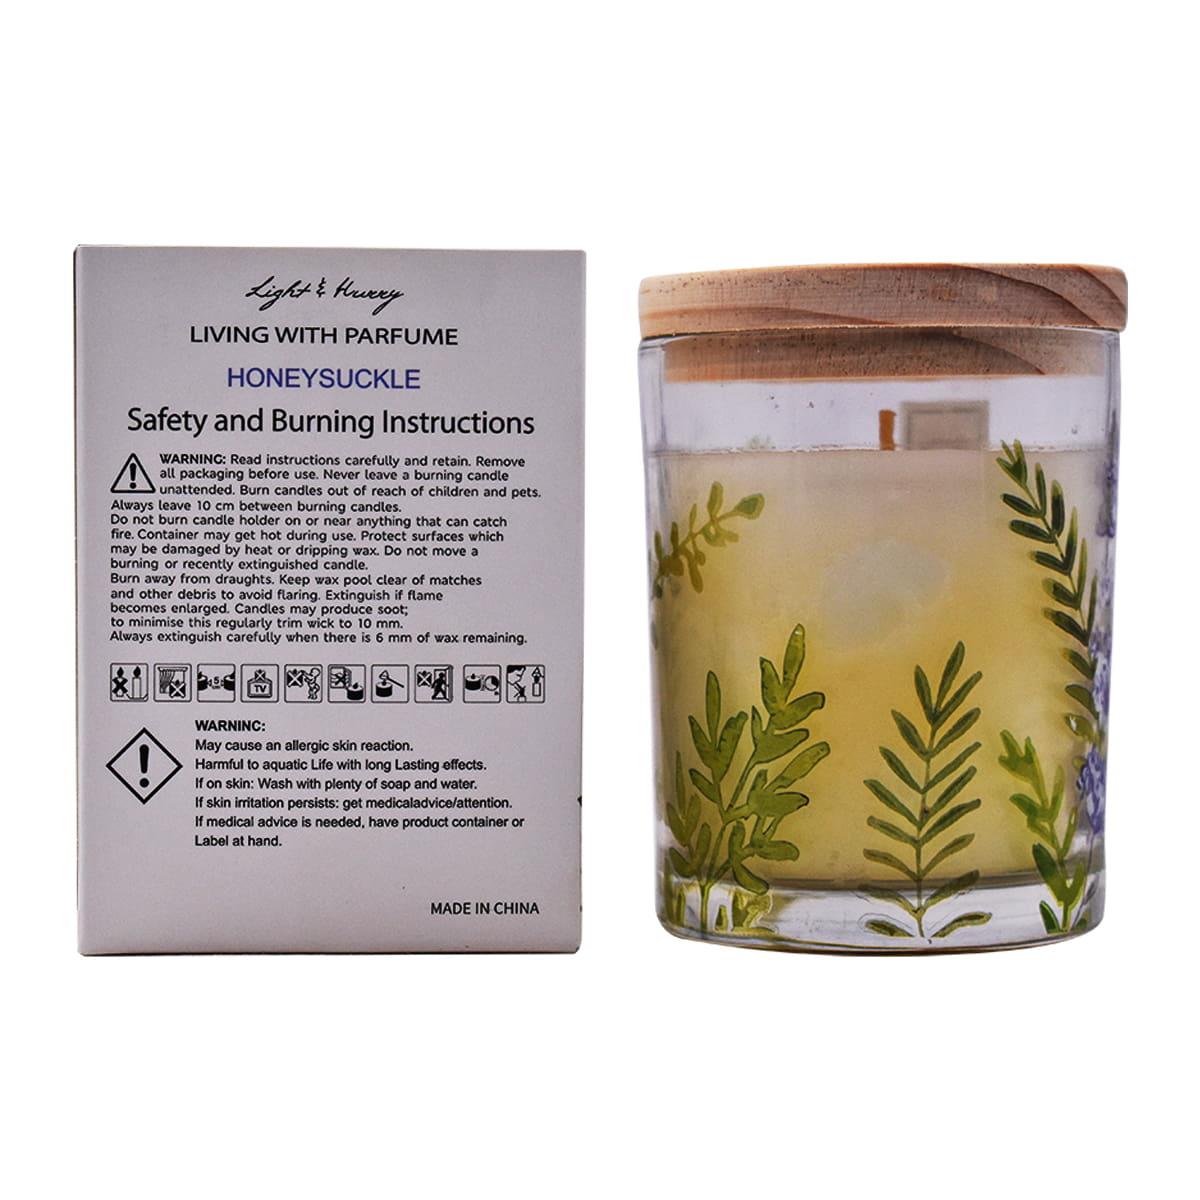 Soy Wax Scented Candle in Glass Jar (40H Burn Time) (AXW2035-A)